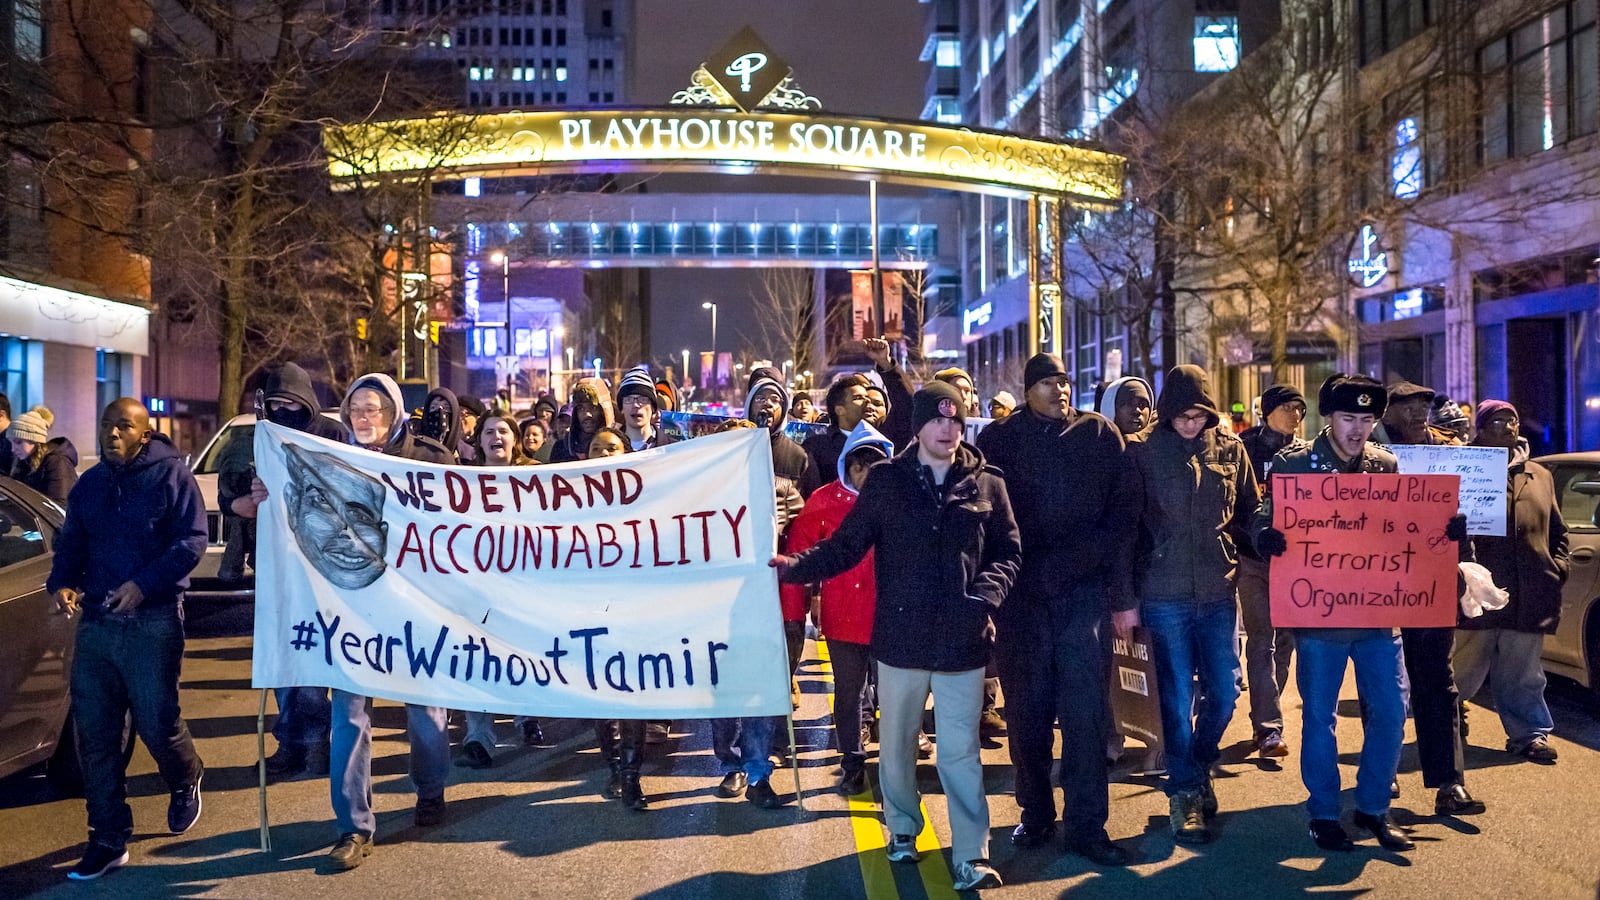 A group of protesters march downtown with a sign that reads, “We demand accountability. #YearWithoutTamir.”